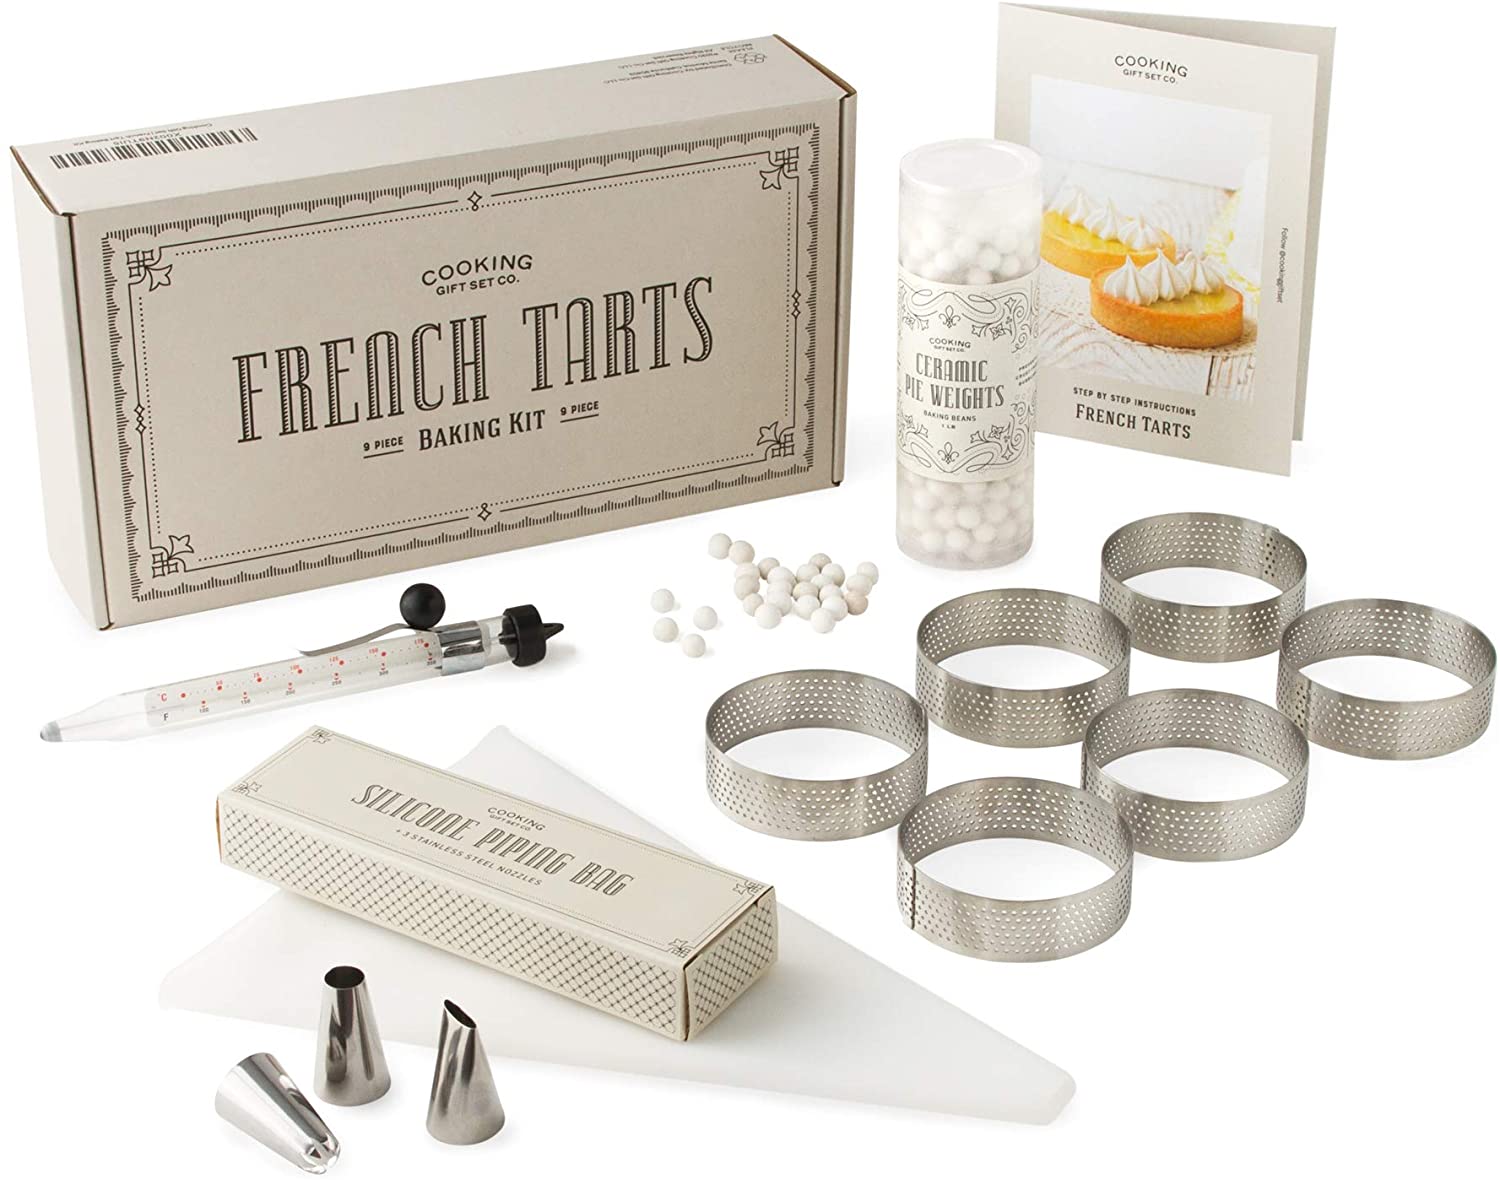 French Tart Baking Set | Unique Gifts for Women: Mom, Sister, and Friends | Easy-to-Follow Instructions & Chef-Quality Baking Tools | Kitchen Gifts, Hostess Gifts, Mom Gifts, Fun Gifts for Women